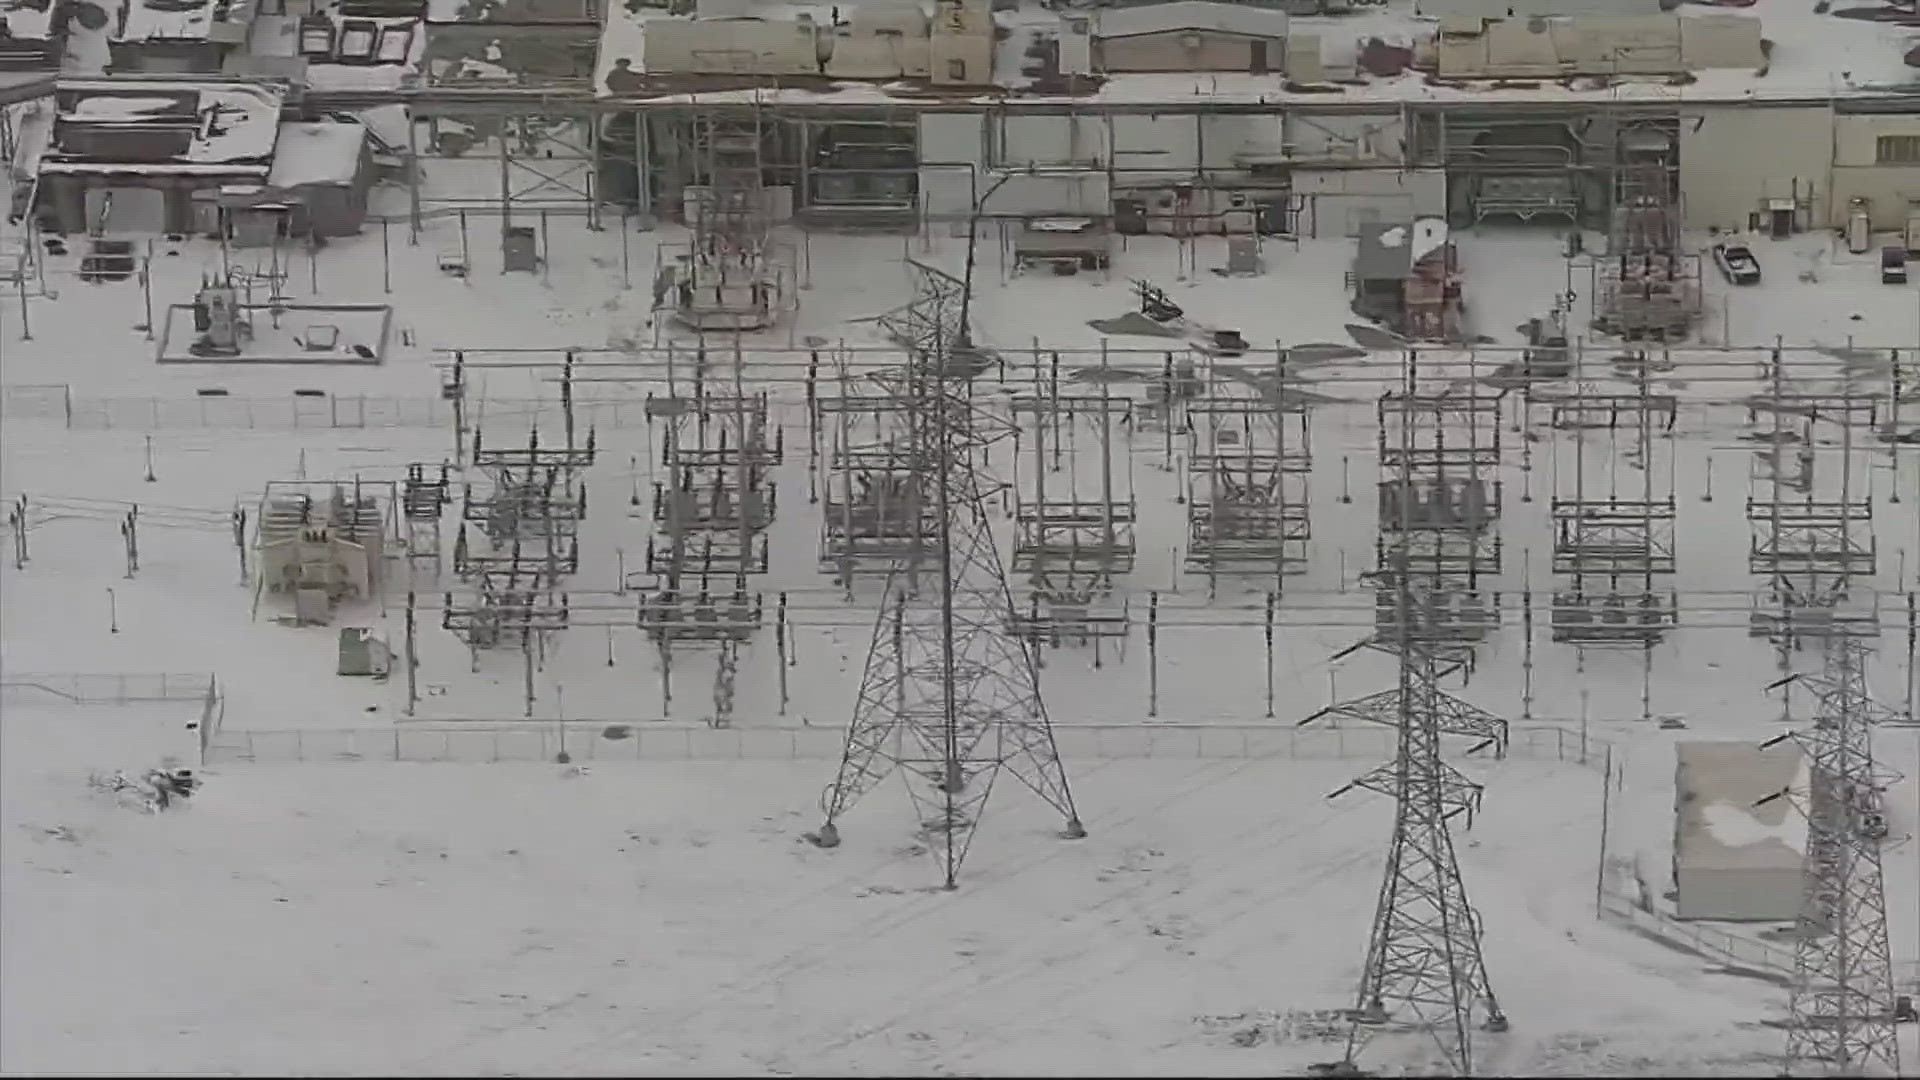 Electric prices set too high during 2021 winter storm, court says | wfaa.com